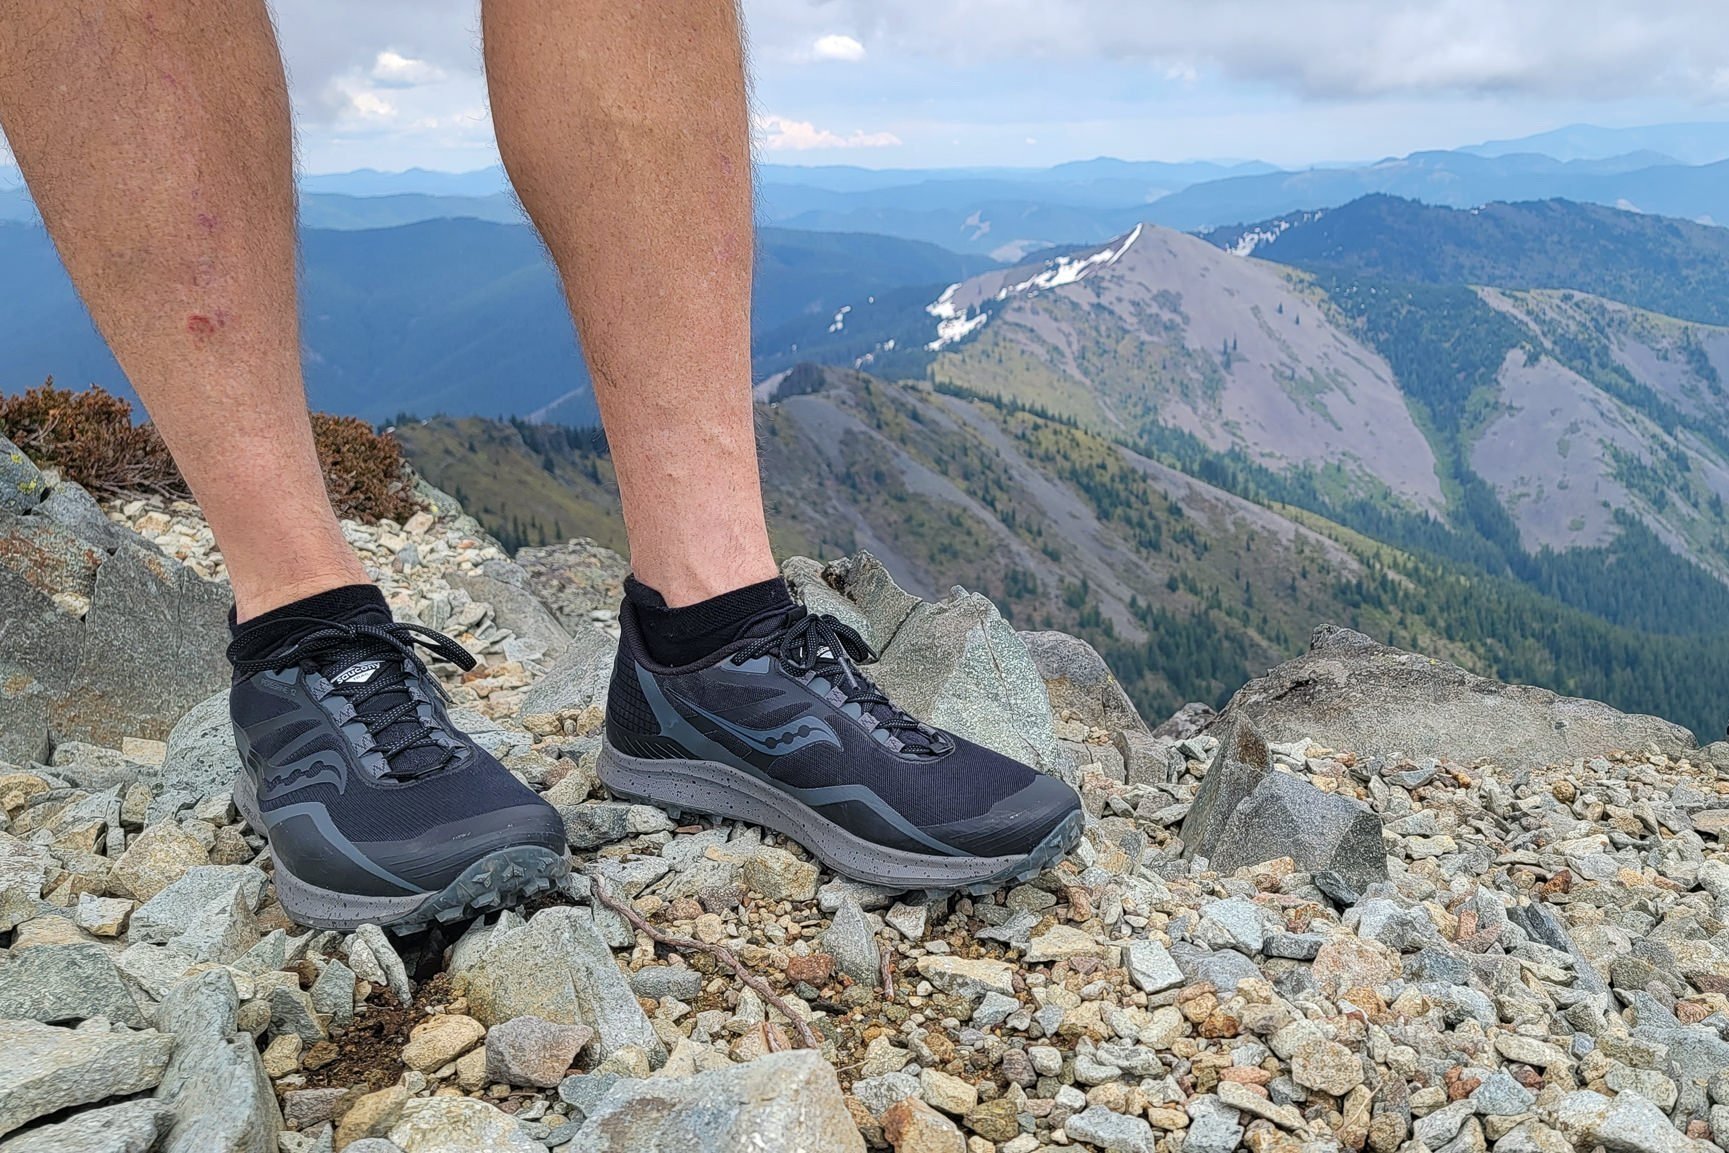 Closeup of a backpacker wearing a pair of black Saucony Peregrine trail running shoes on a mountain ridge